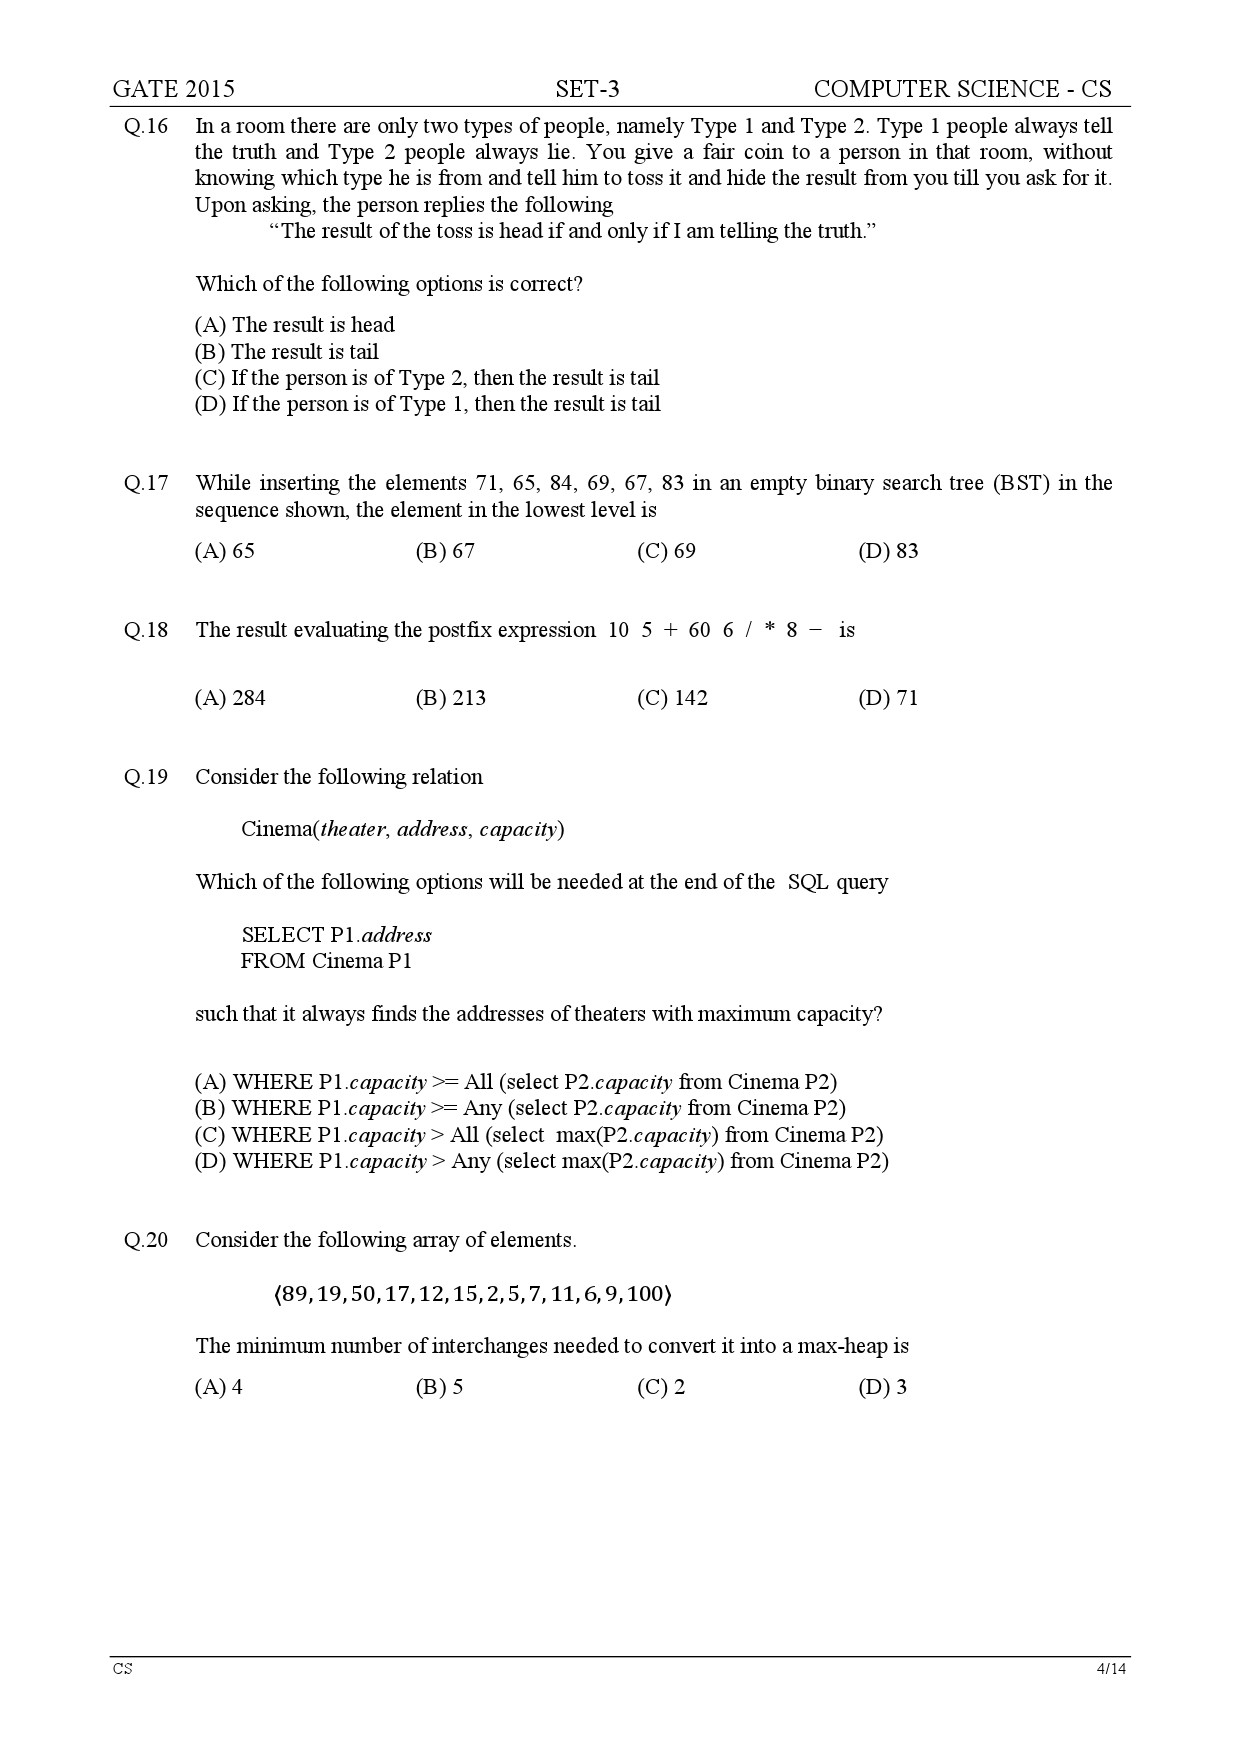 GATE Exam Question Paper 2015 Computer Science and Information Technology Set 3 4